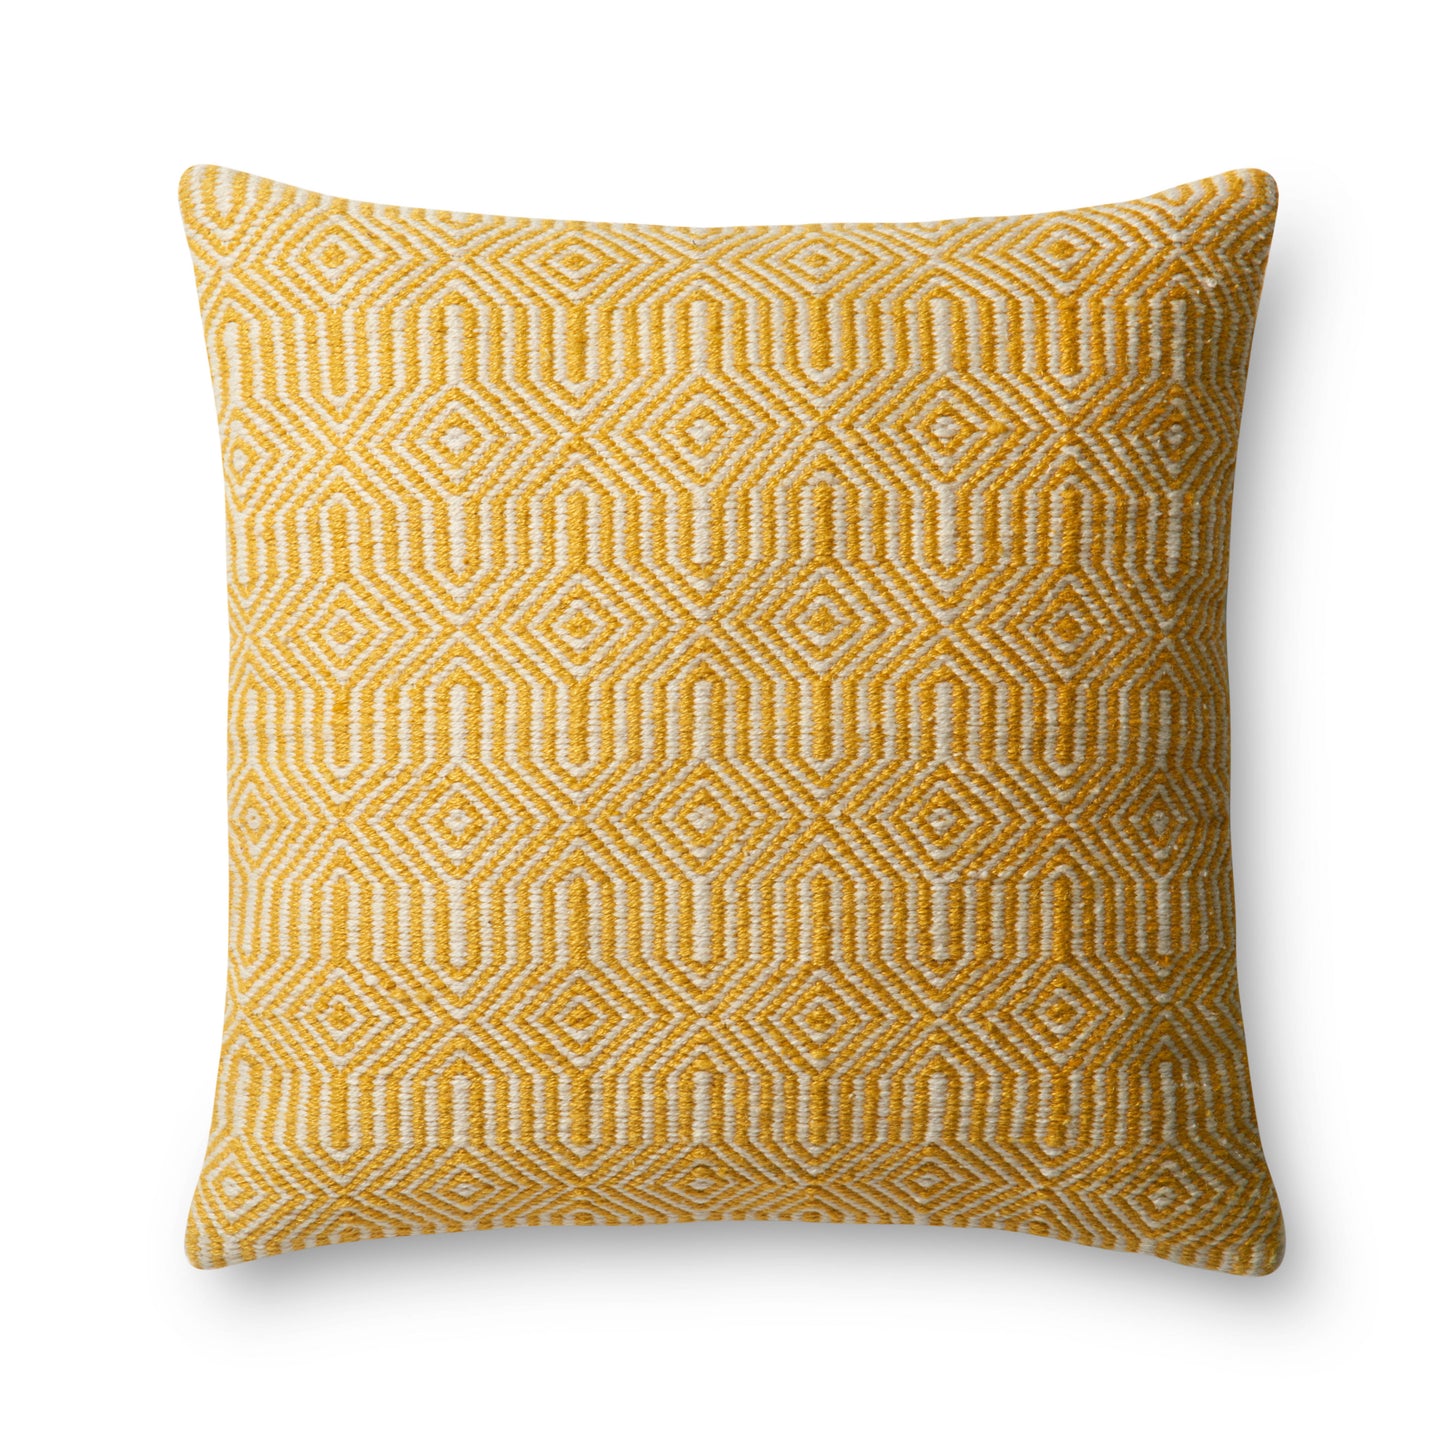 Photo of a pillow;  P0339 Yellow / Ivory 22" x 22" Cover w/Poly Pillow